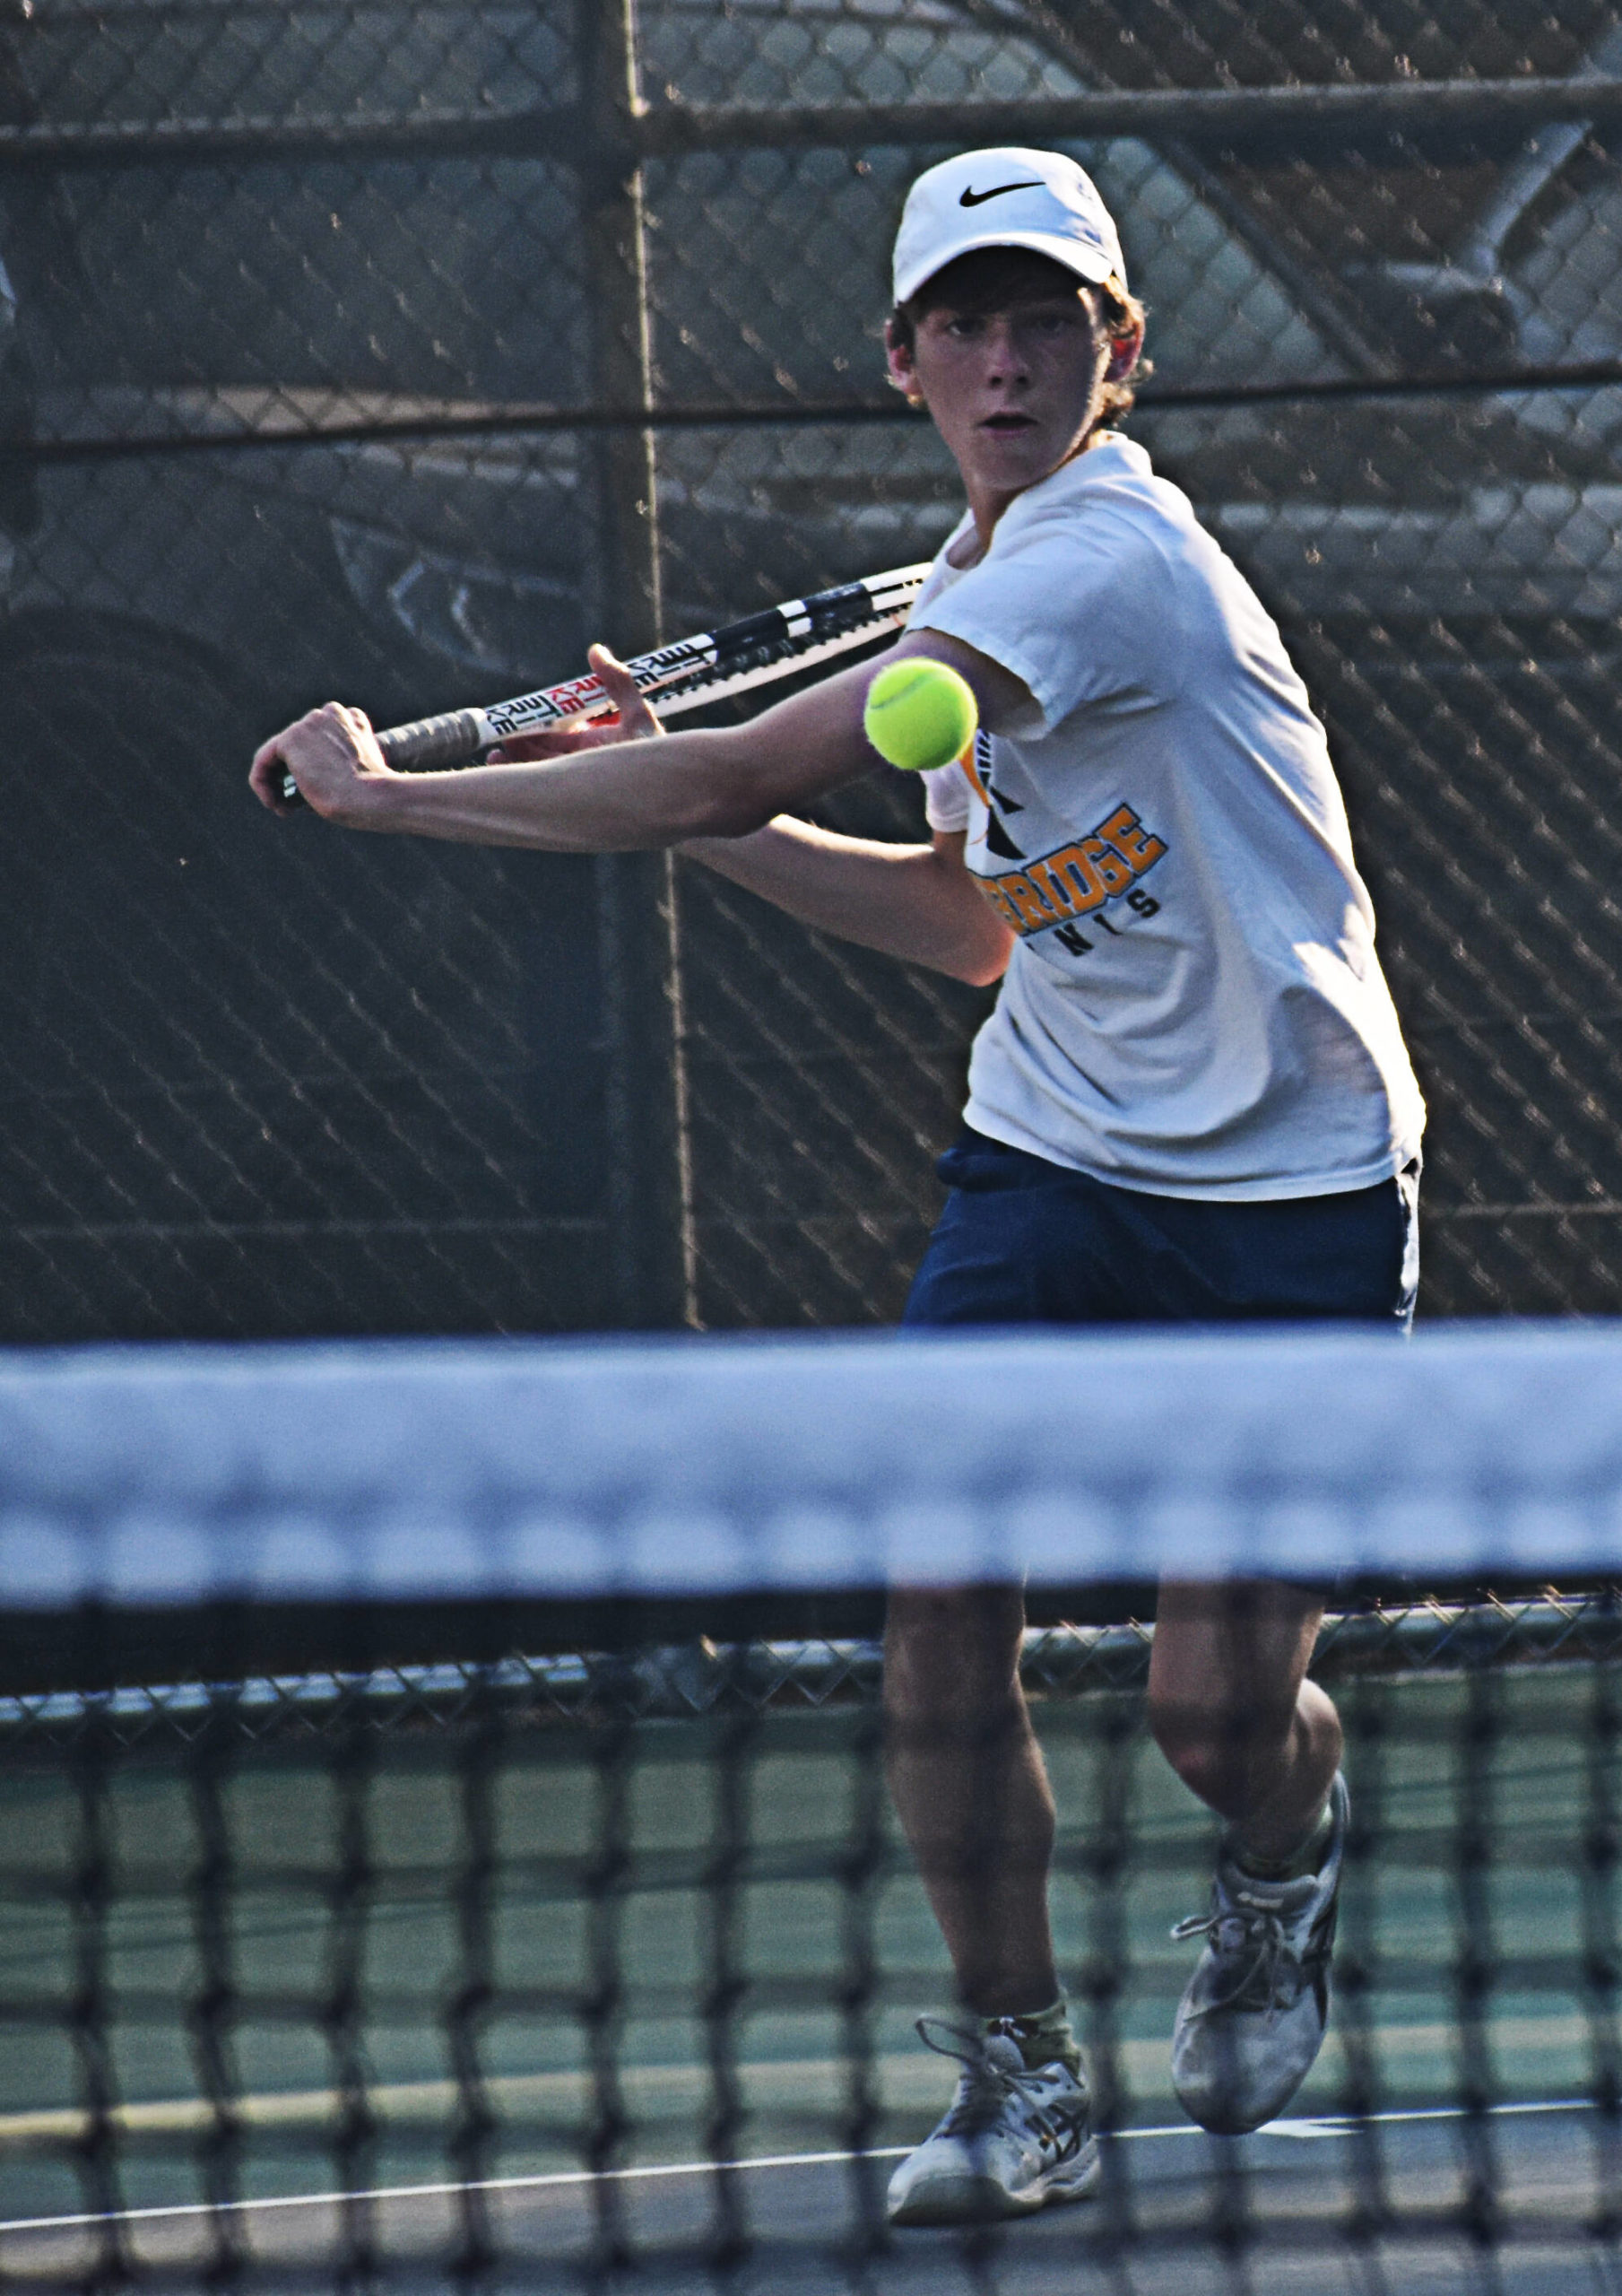 Reed Grandt was unable to play his second set after a long first set.